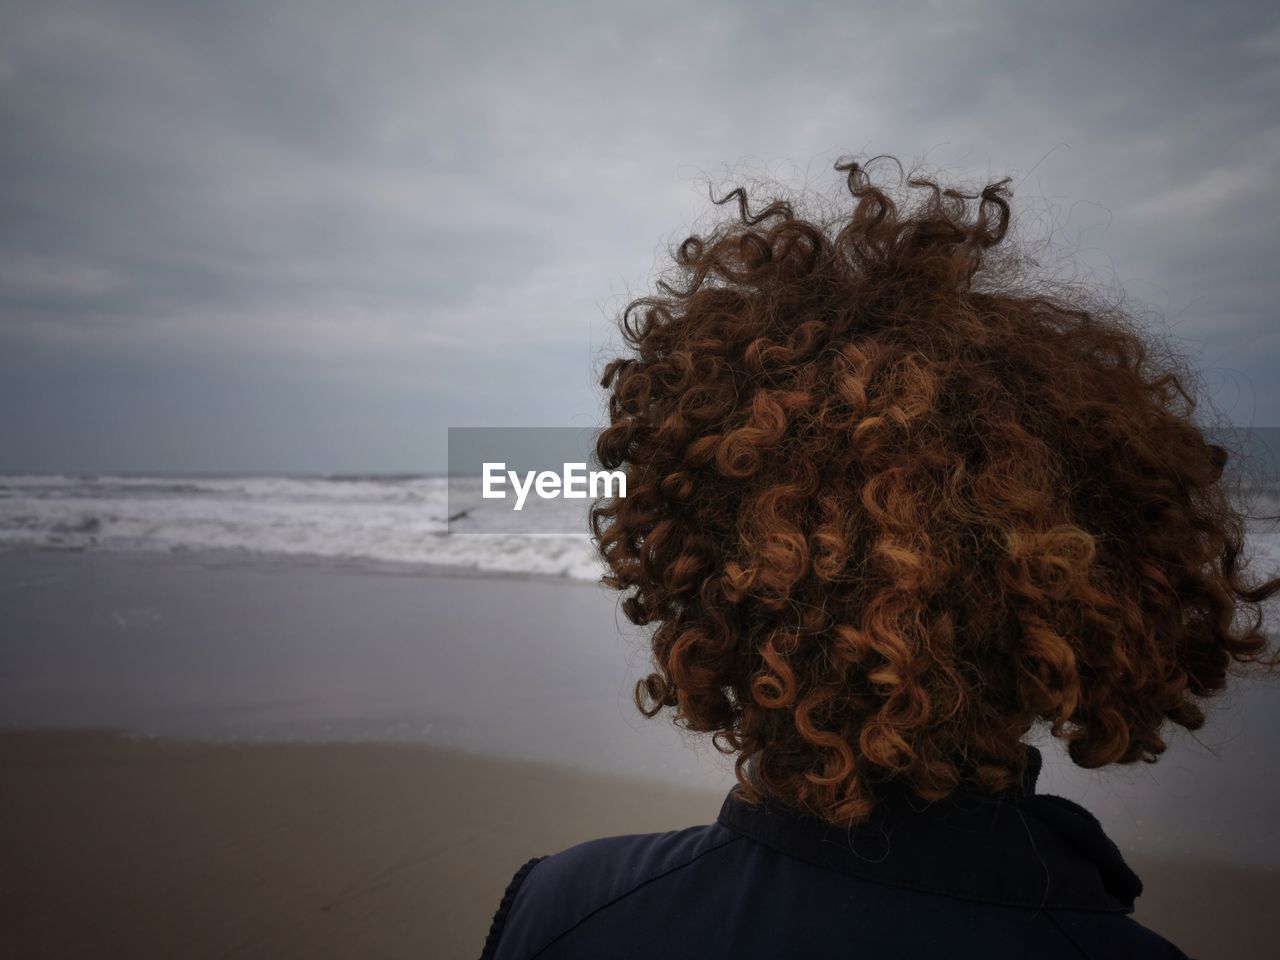 curly hair, hairstyle, one person, sea, water, sky, beach, rear view, adult, nature, land, women, human hair, cloud, beauty in nature, tranquility, headshot, long hair, portrait, morning, horizon over water, ocean, sunlight, leisure activity, young adult, horizon, environment, brown hair, tranquil scene, scenics - nature, vacation, outdoors, trip, lifestyles, looking at view, relaxation, person, holiday, solitude, day, wind, copy space